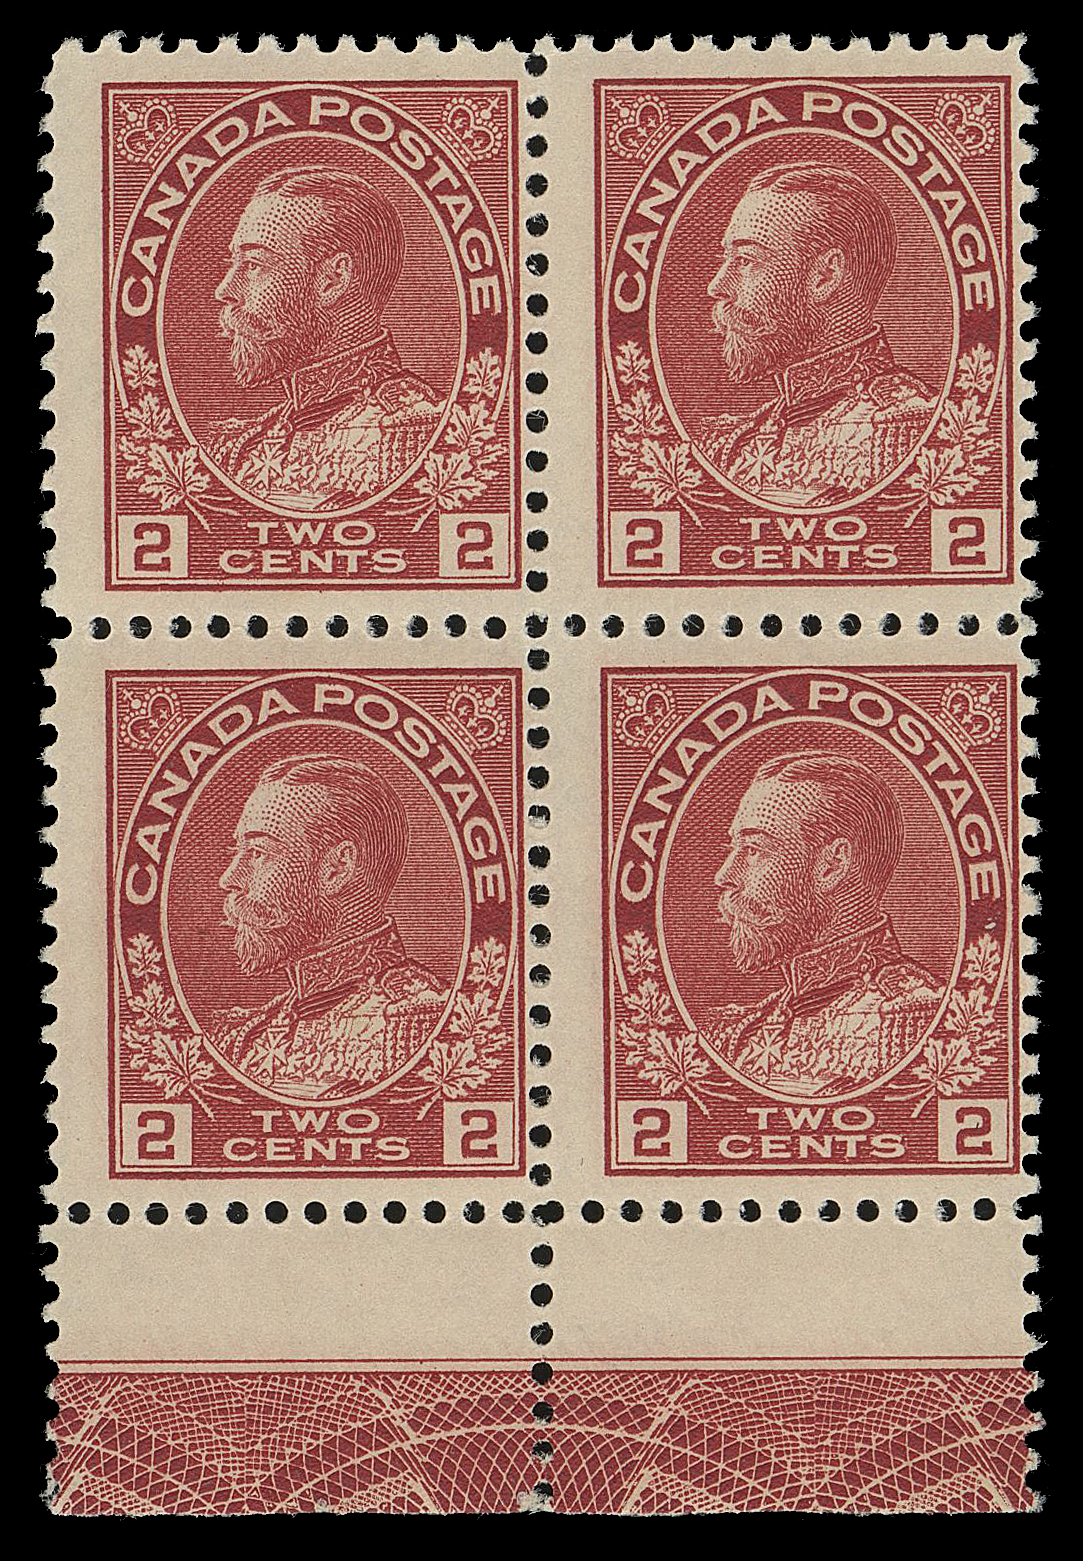 ADMIRAL STAMPS  106,A remarkable block displaying complete, full strength Type C INVERTED lathework, superb bright fresh colour, the key lathework pair and sheet margin with full immaculate original gum, never hinged. A very rare multiple and in excellent state of preservation, Fine LH (Unitrade cat. as two NH singles)